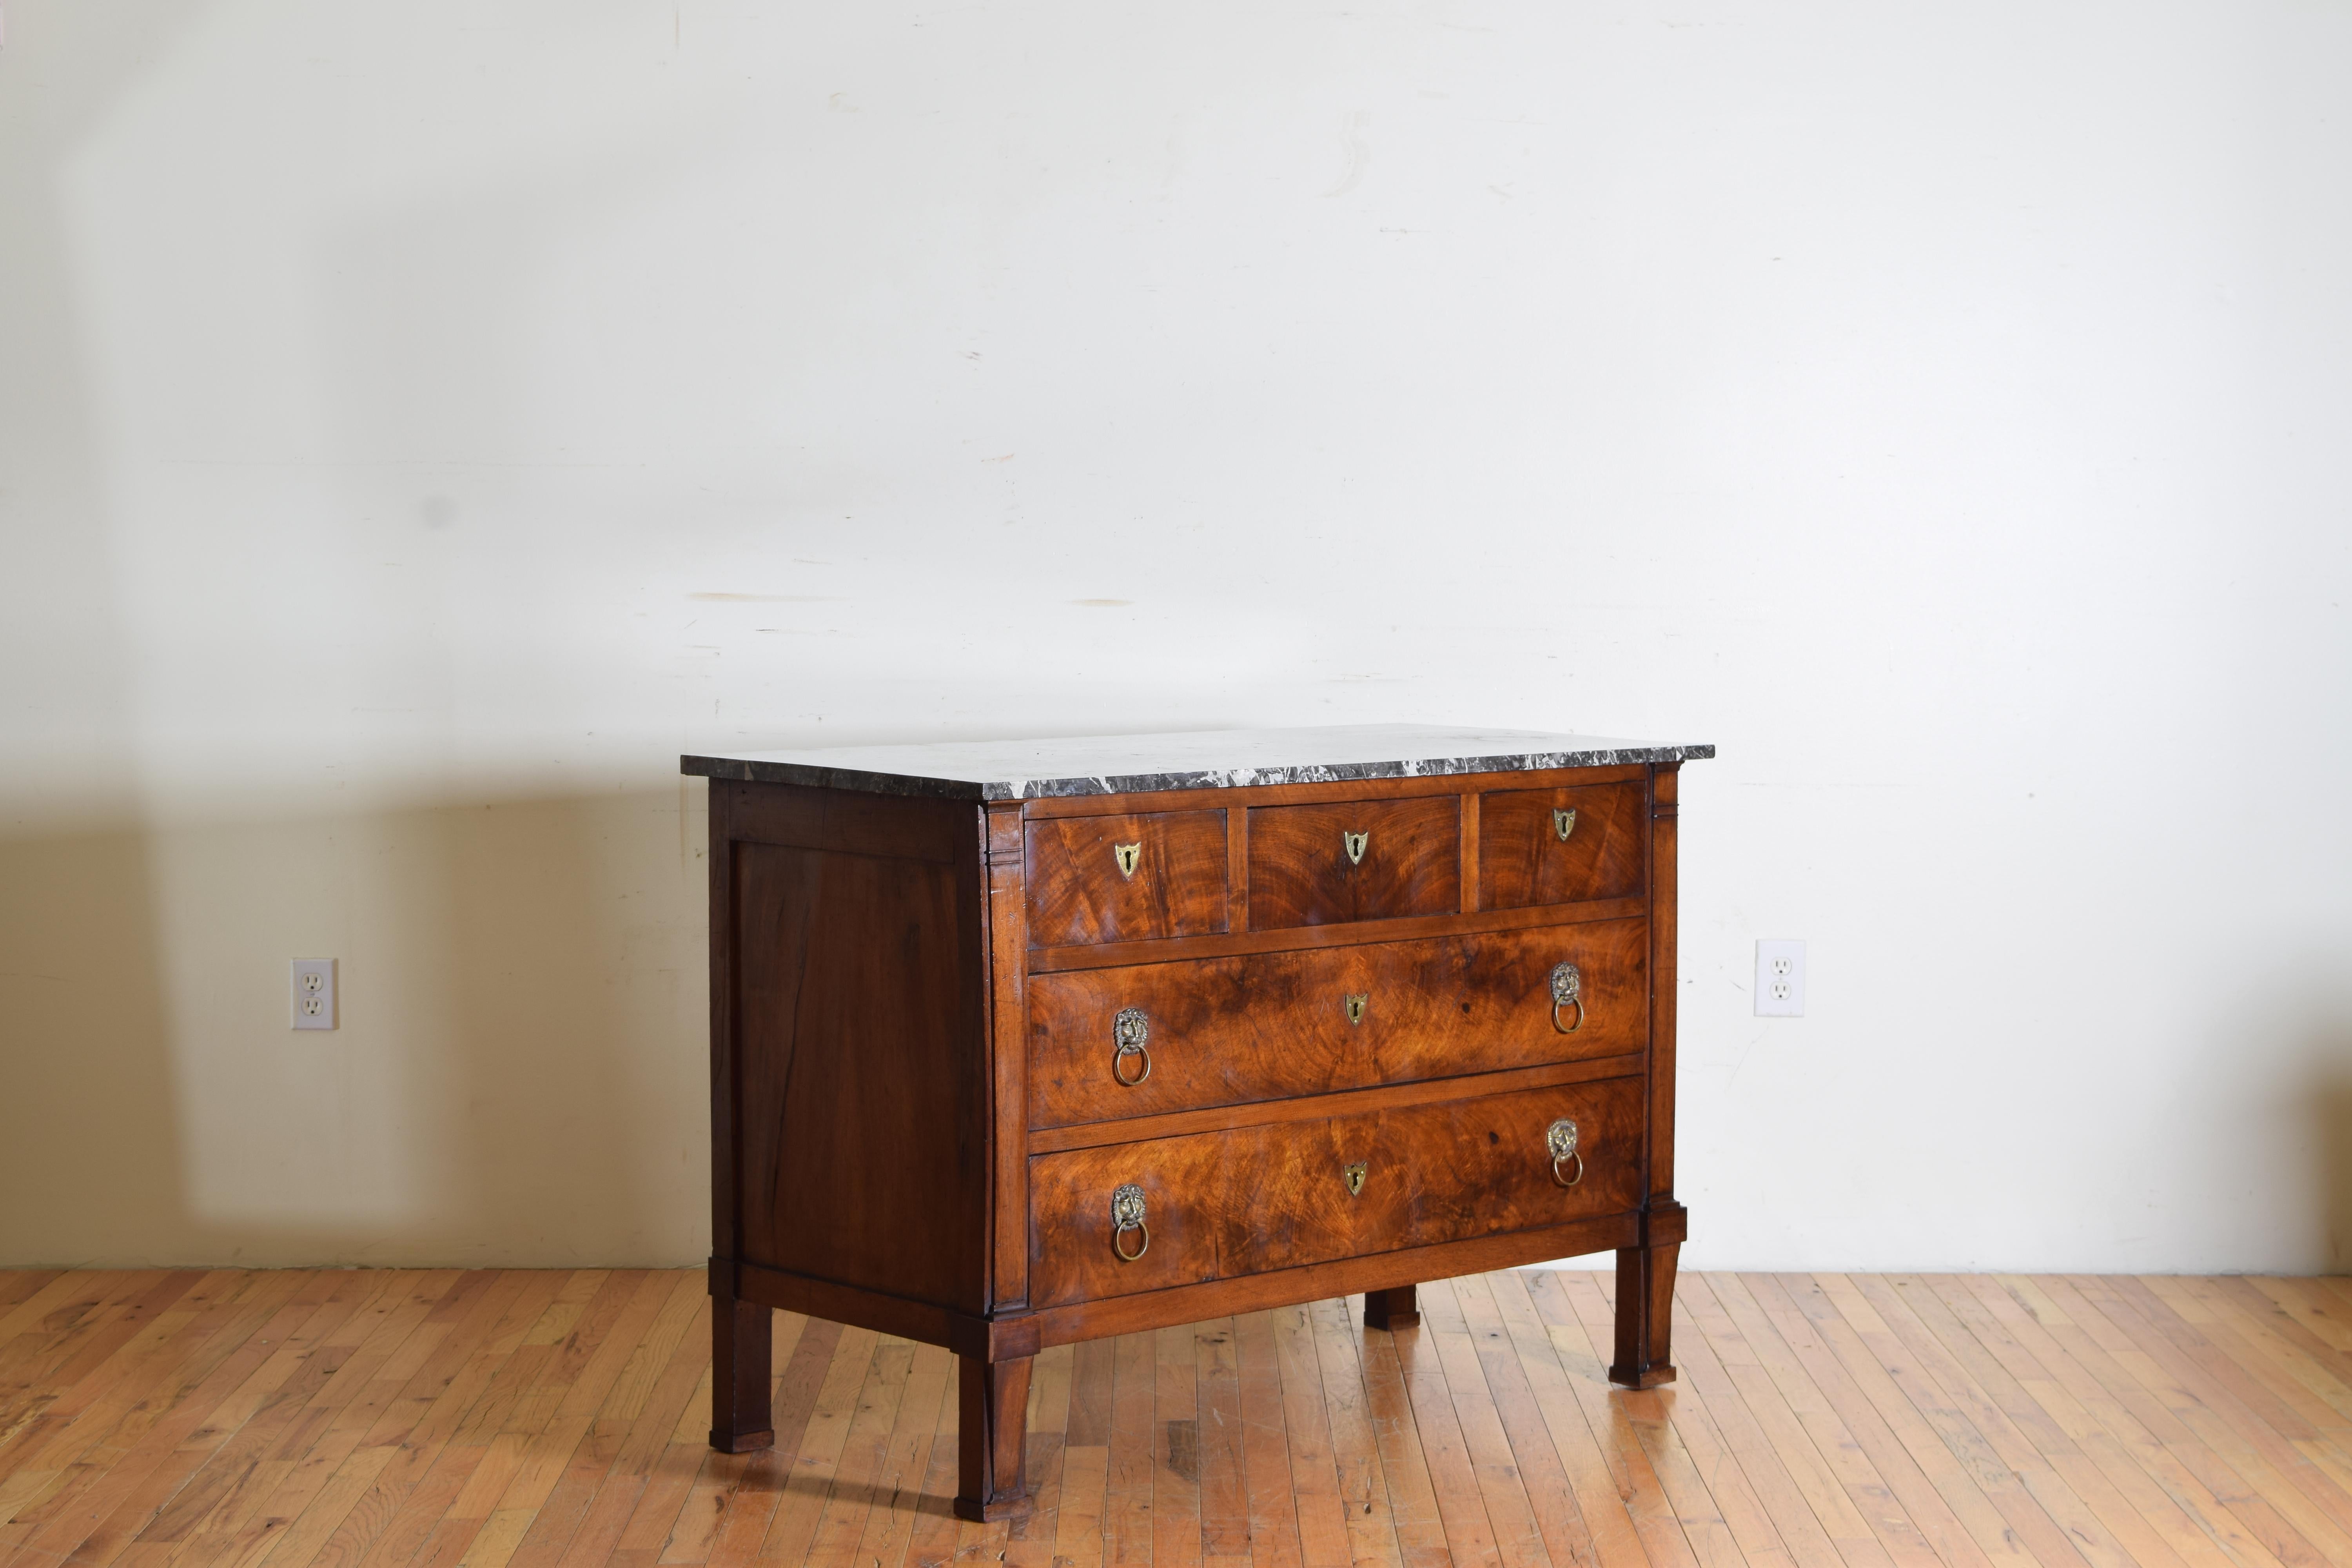 Neoclassical French Neoclassic Walnut and Marble Top 5-Drawer Commode, 2ndq 19th Century